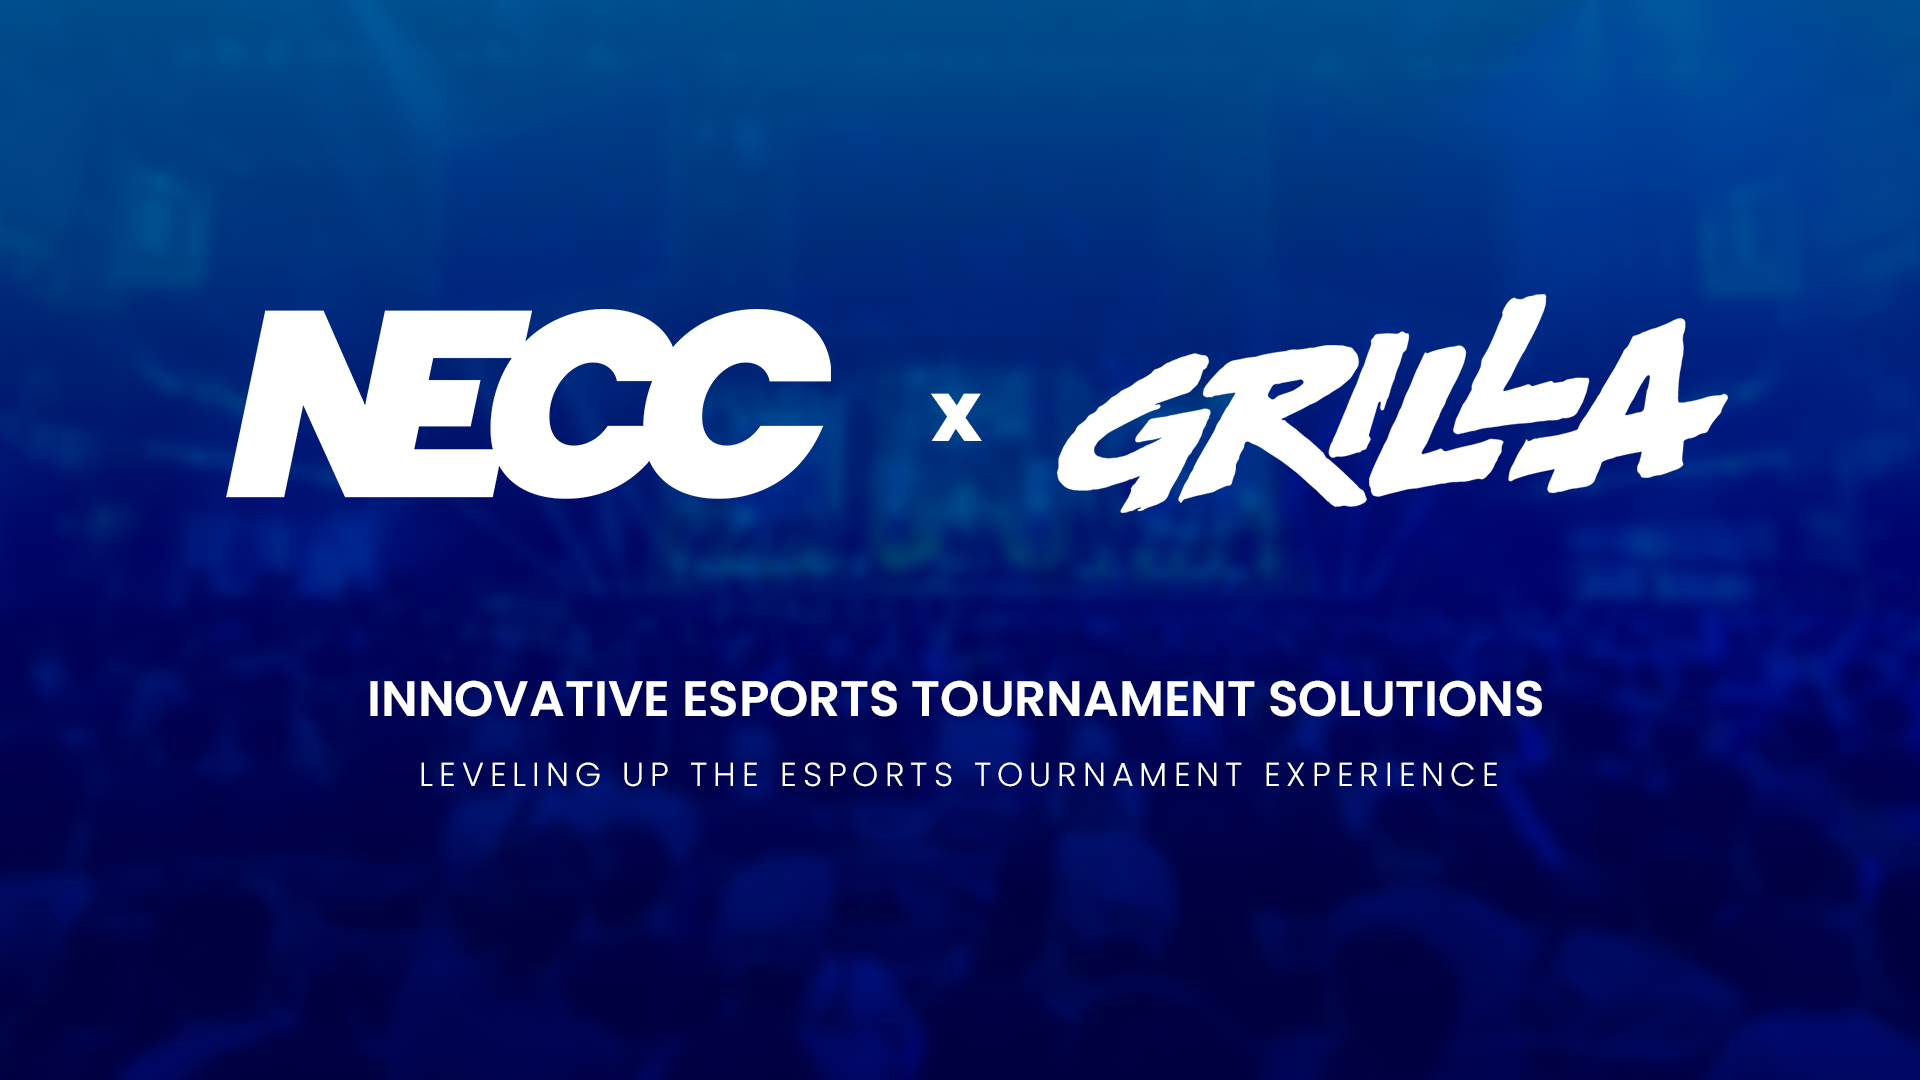 NECC Announces Partnership with Grilla, Two Tournaments Kickoff Relationship